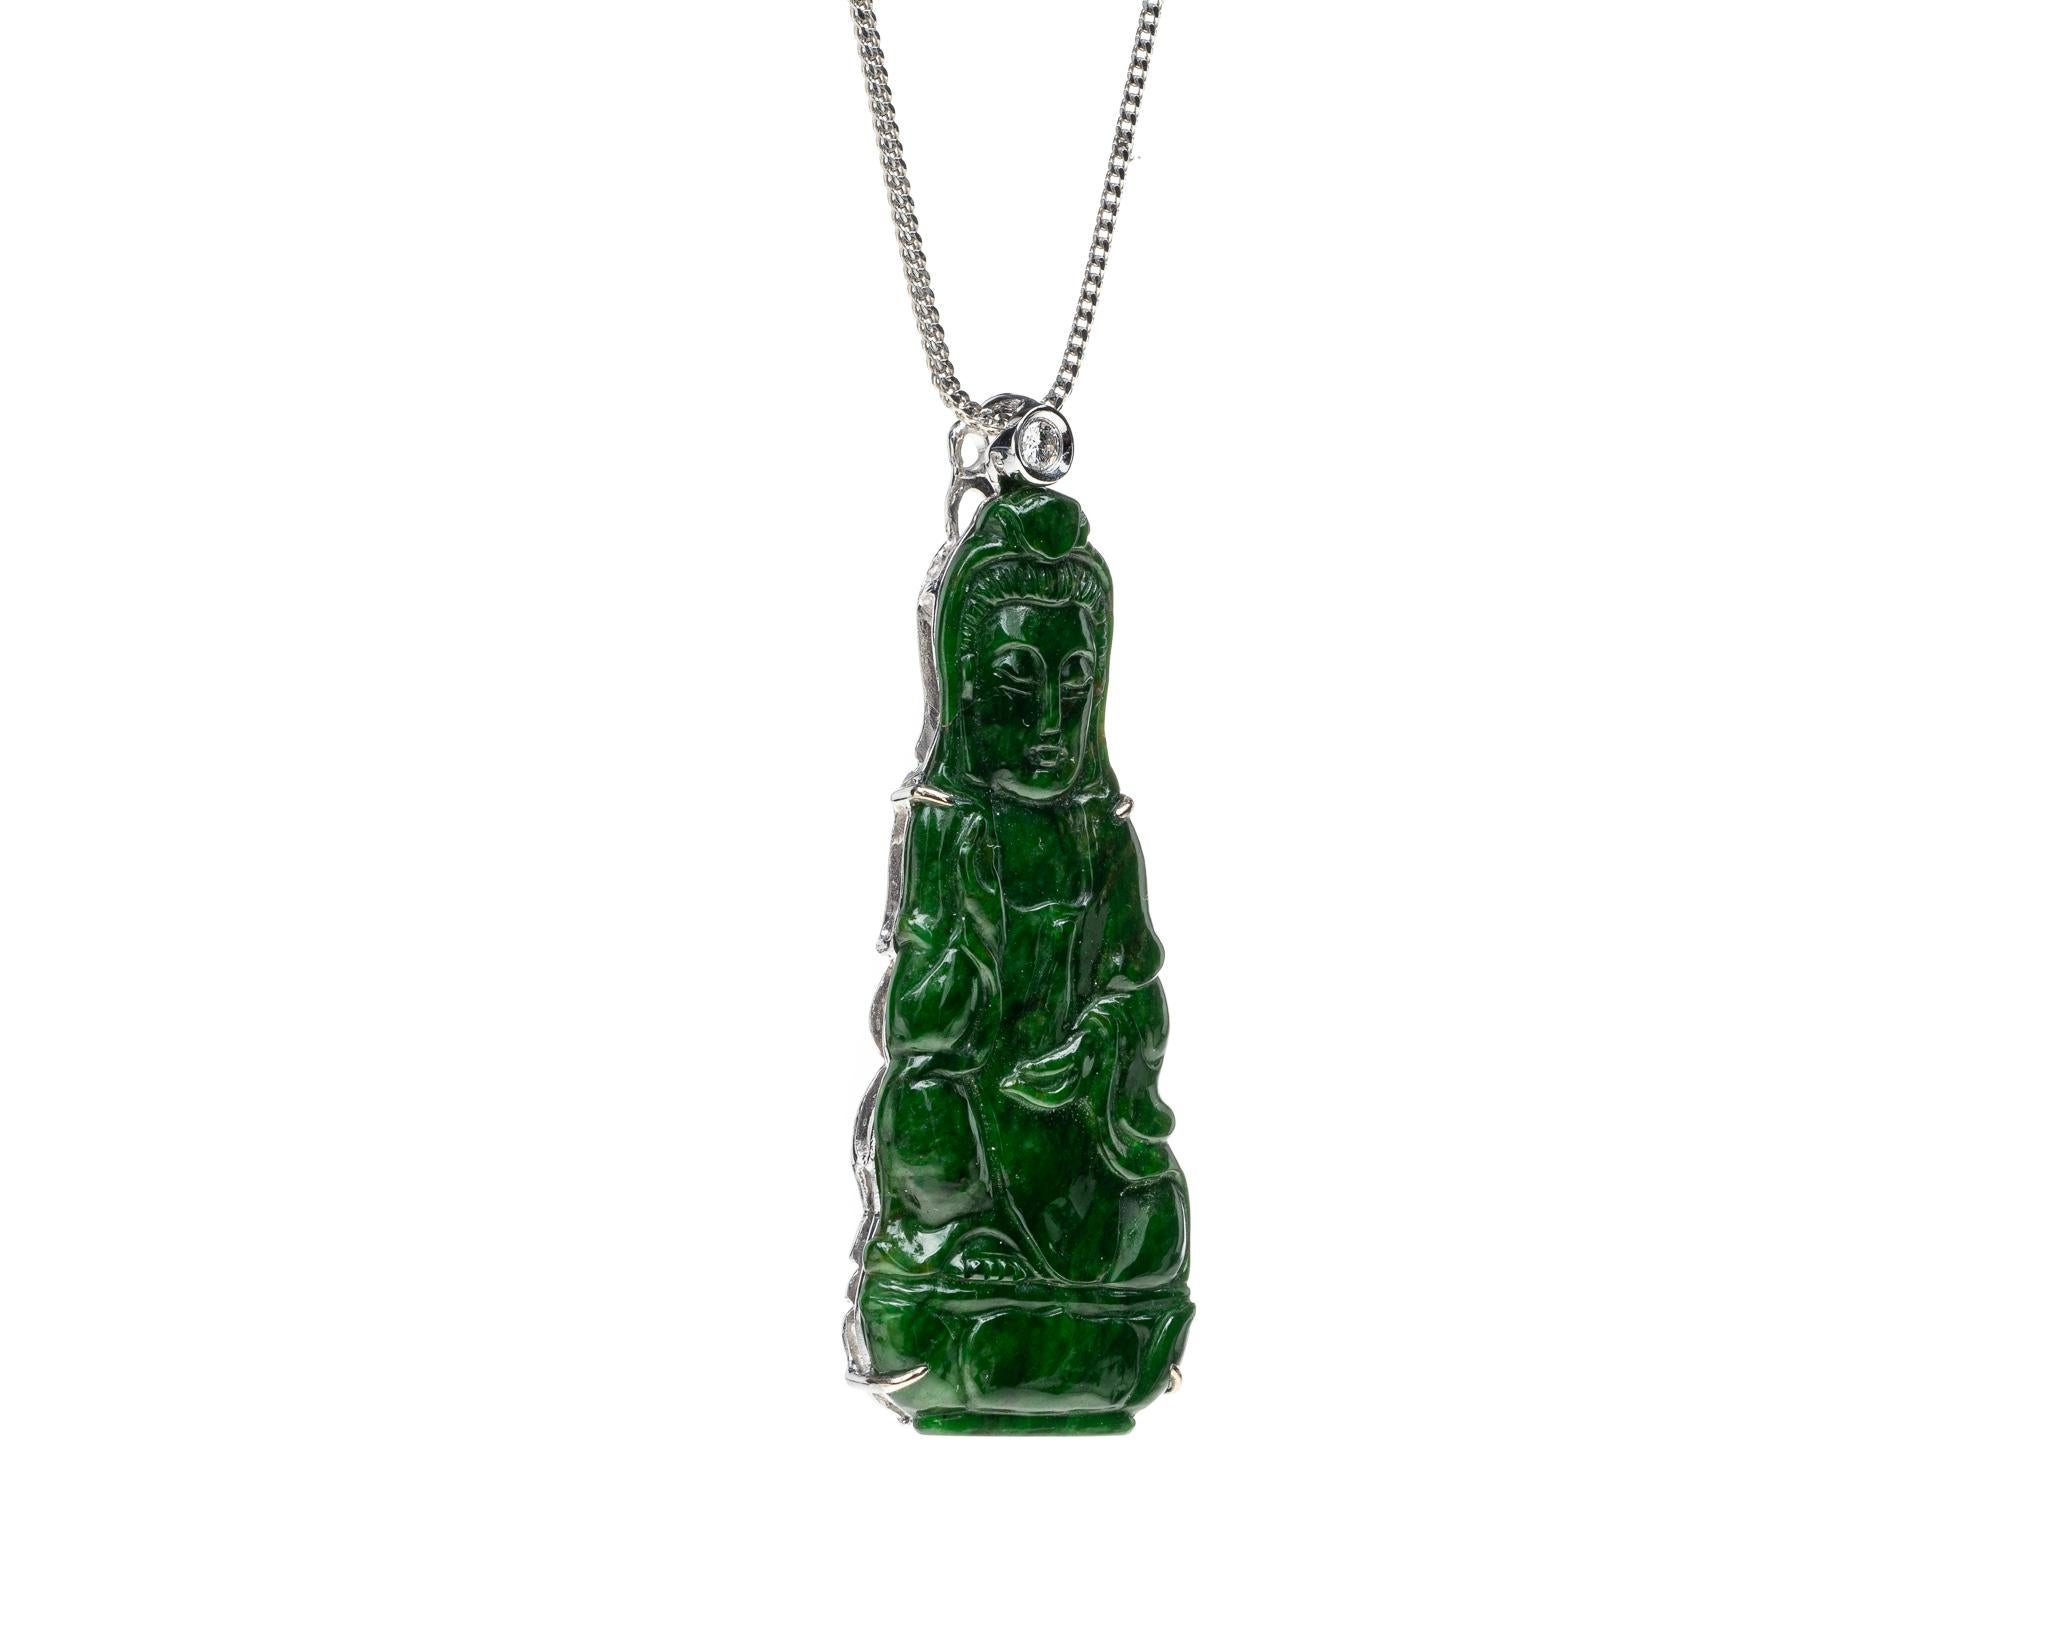 This is an all natural, untreated green jadeite jade carved Quan Yin god pendant set on an 18K white gold bail.  The carved Quan Yin god symbolizes compassion and protection. 

It measures 1.89  inches (48.2 mm) x 0.75 inches (19.2 mm) with